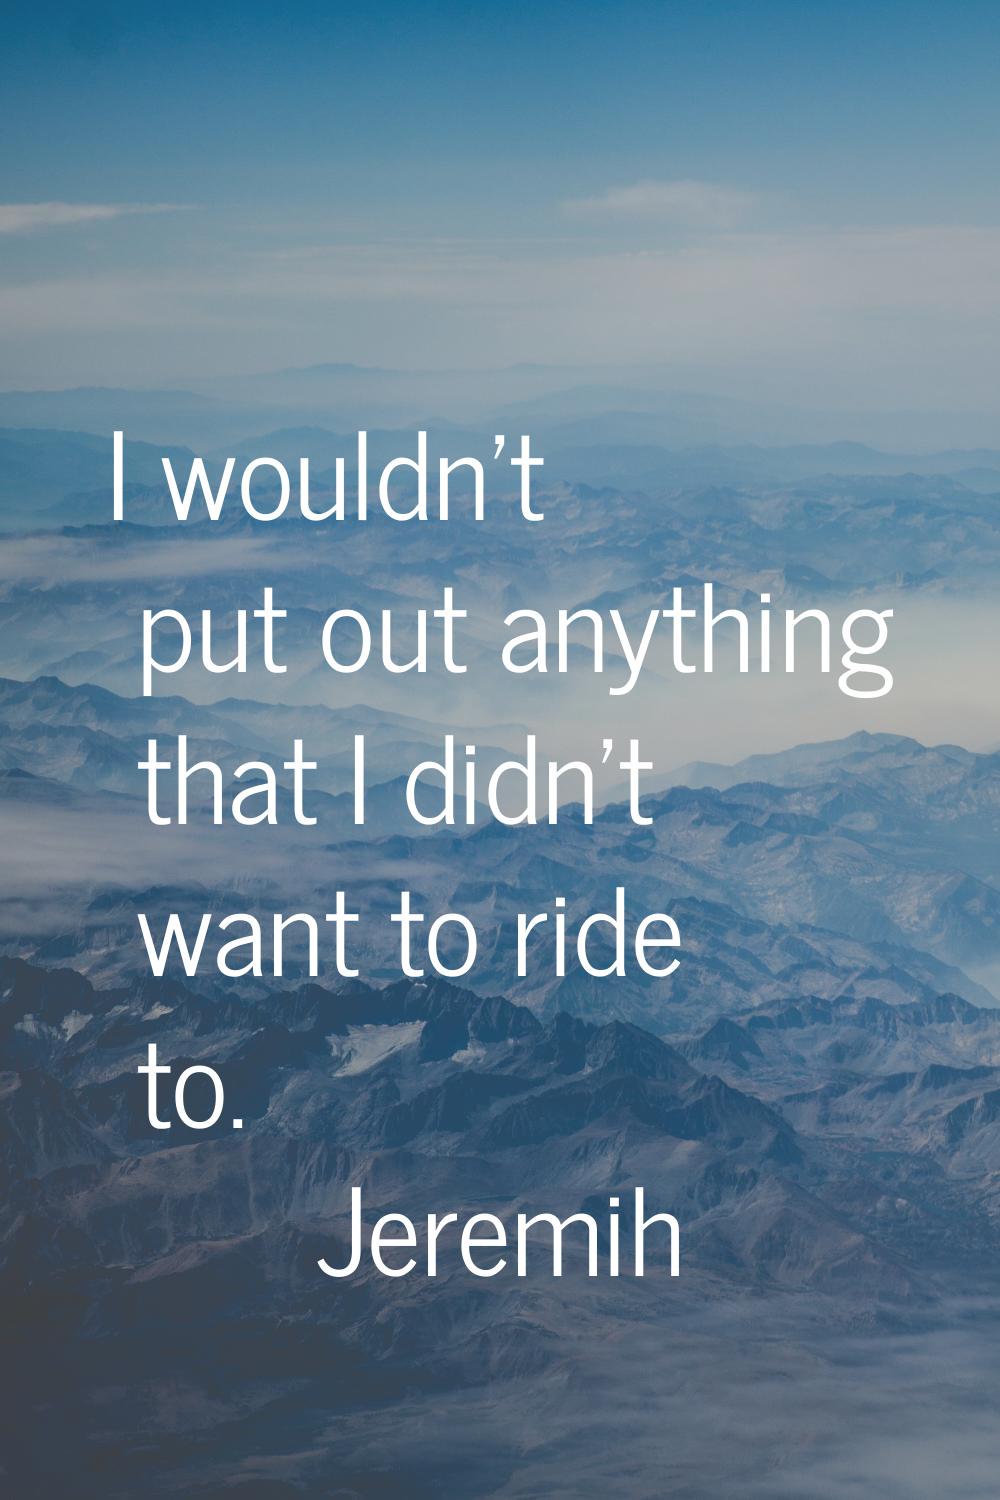 I wouldn't put out anything that I didn't want to ride to.